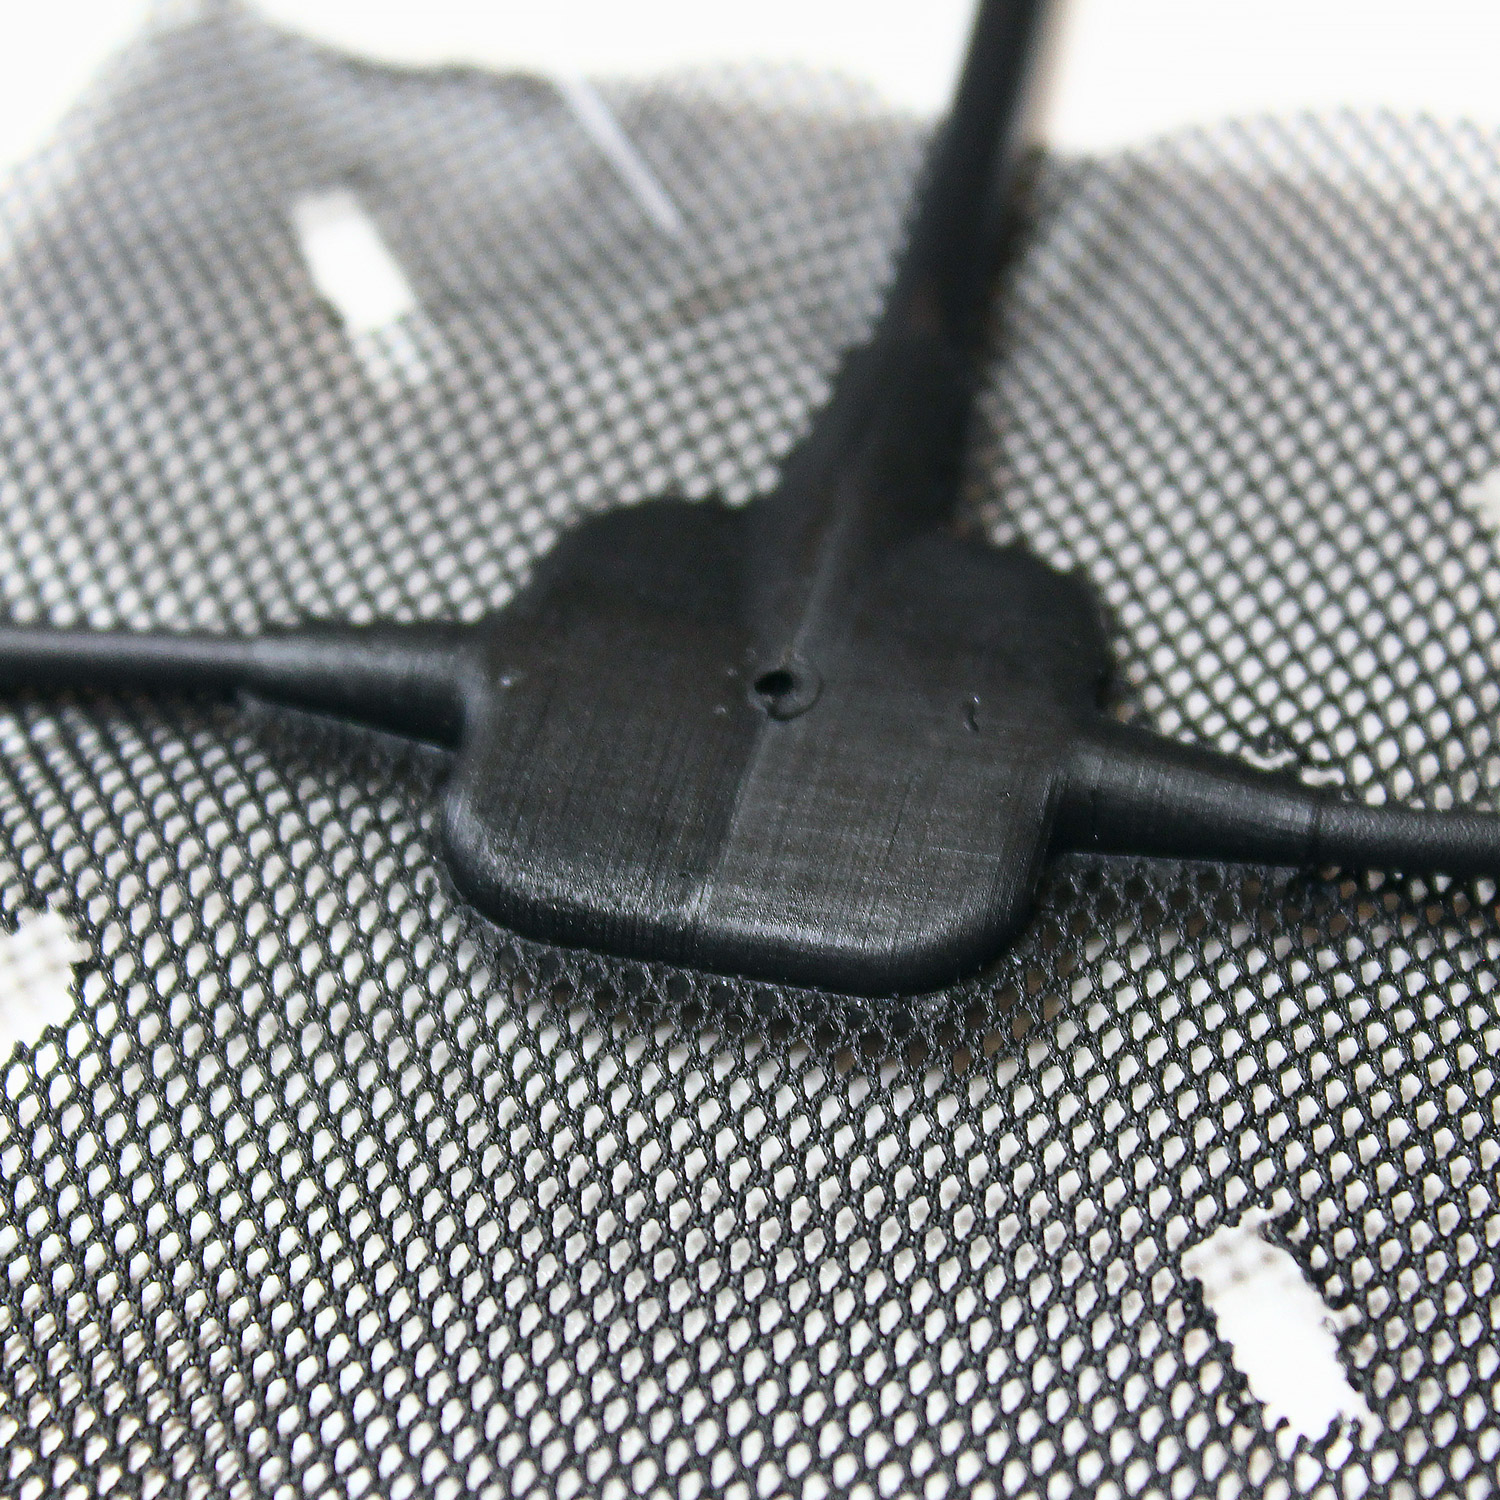 Overmoulded component